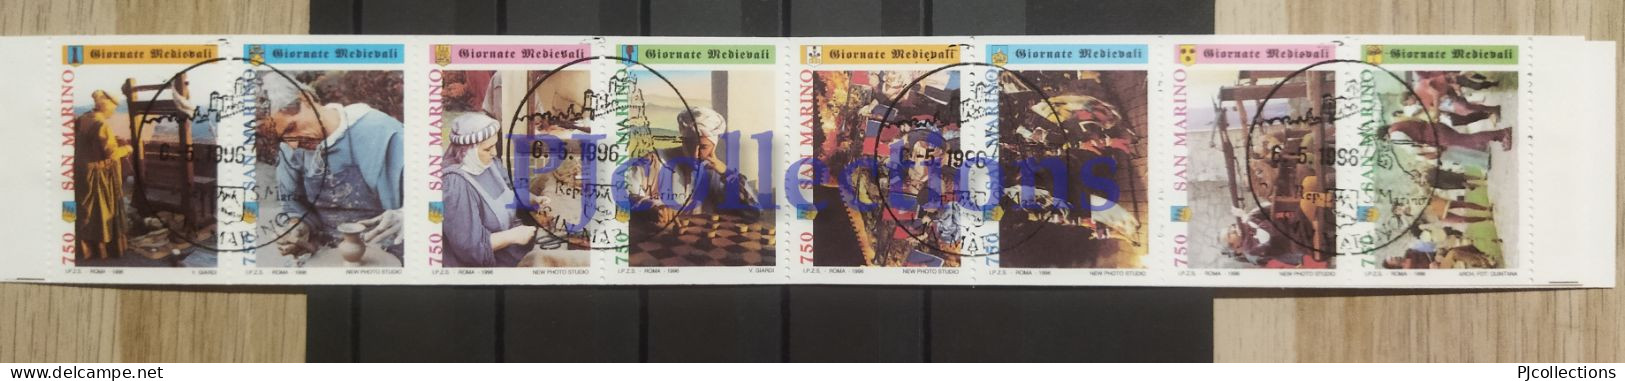 4578-SAN MARINO 1996 GIORNATE MEDIEVALI - MEDIEVAL DAYS FULL BOOKLET 8 STAMPS C/ANNULLO 1° GIORNO - USED - Gebraucht